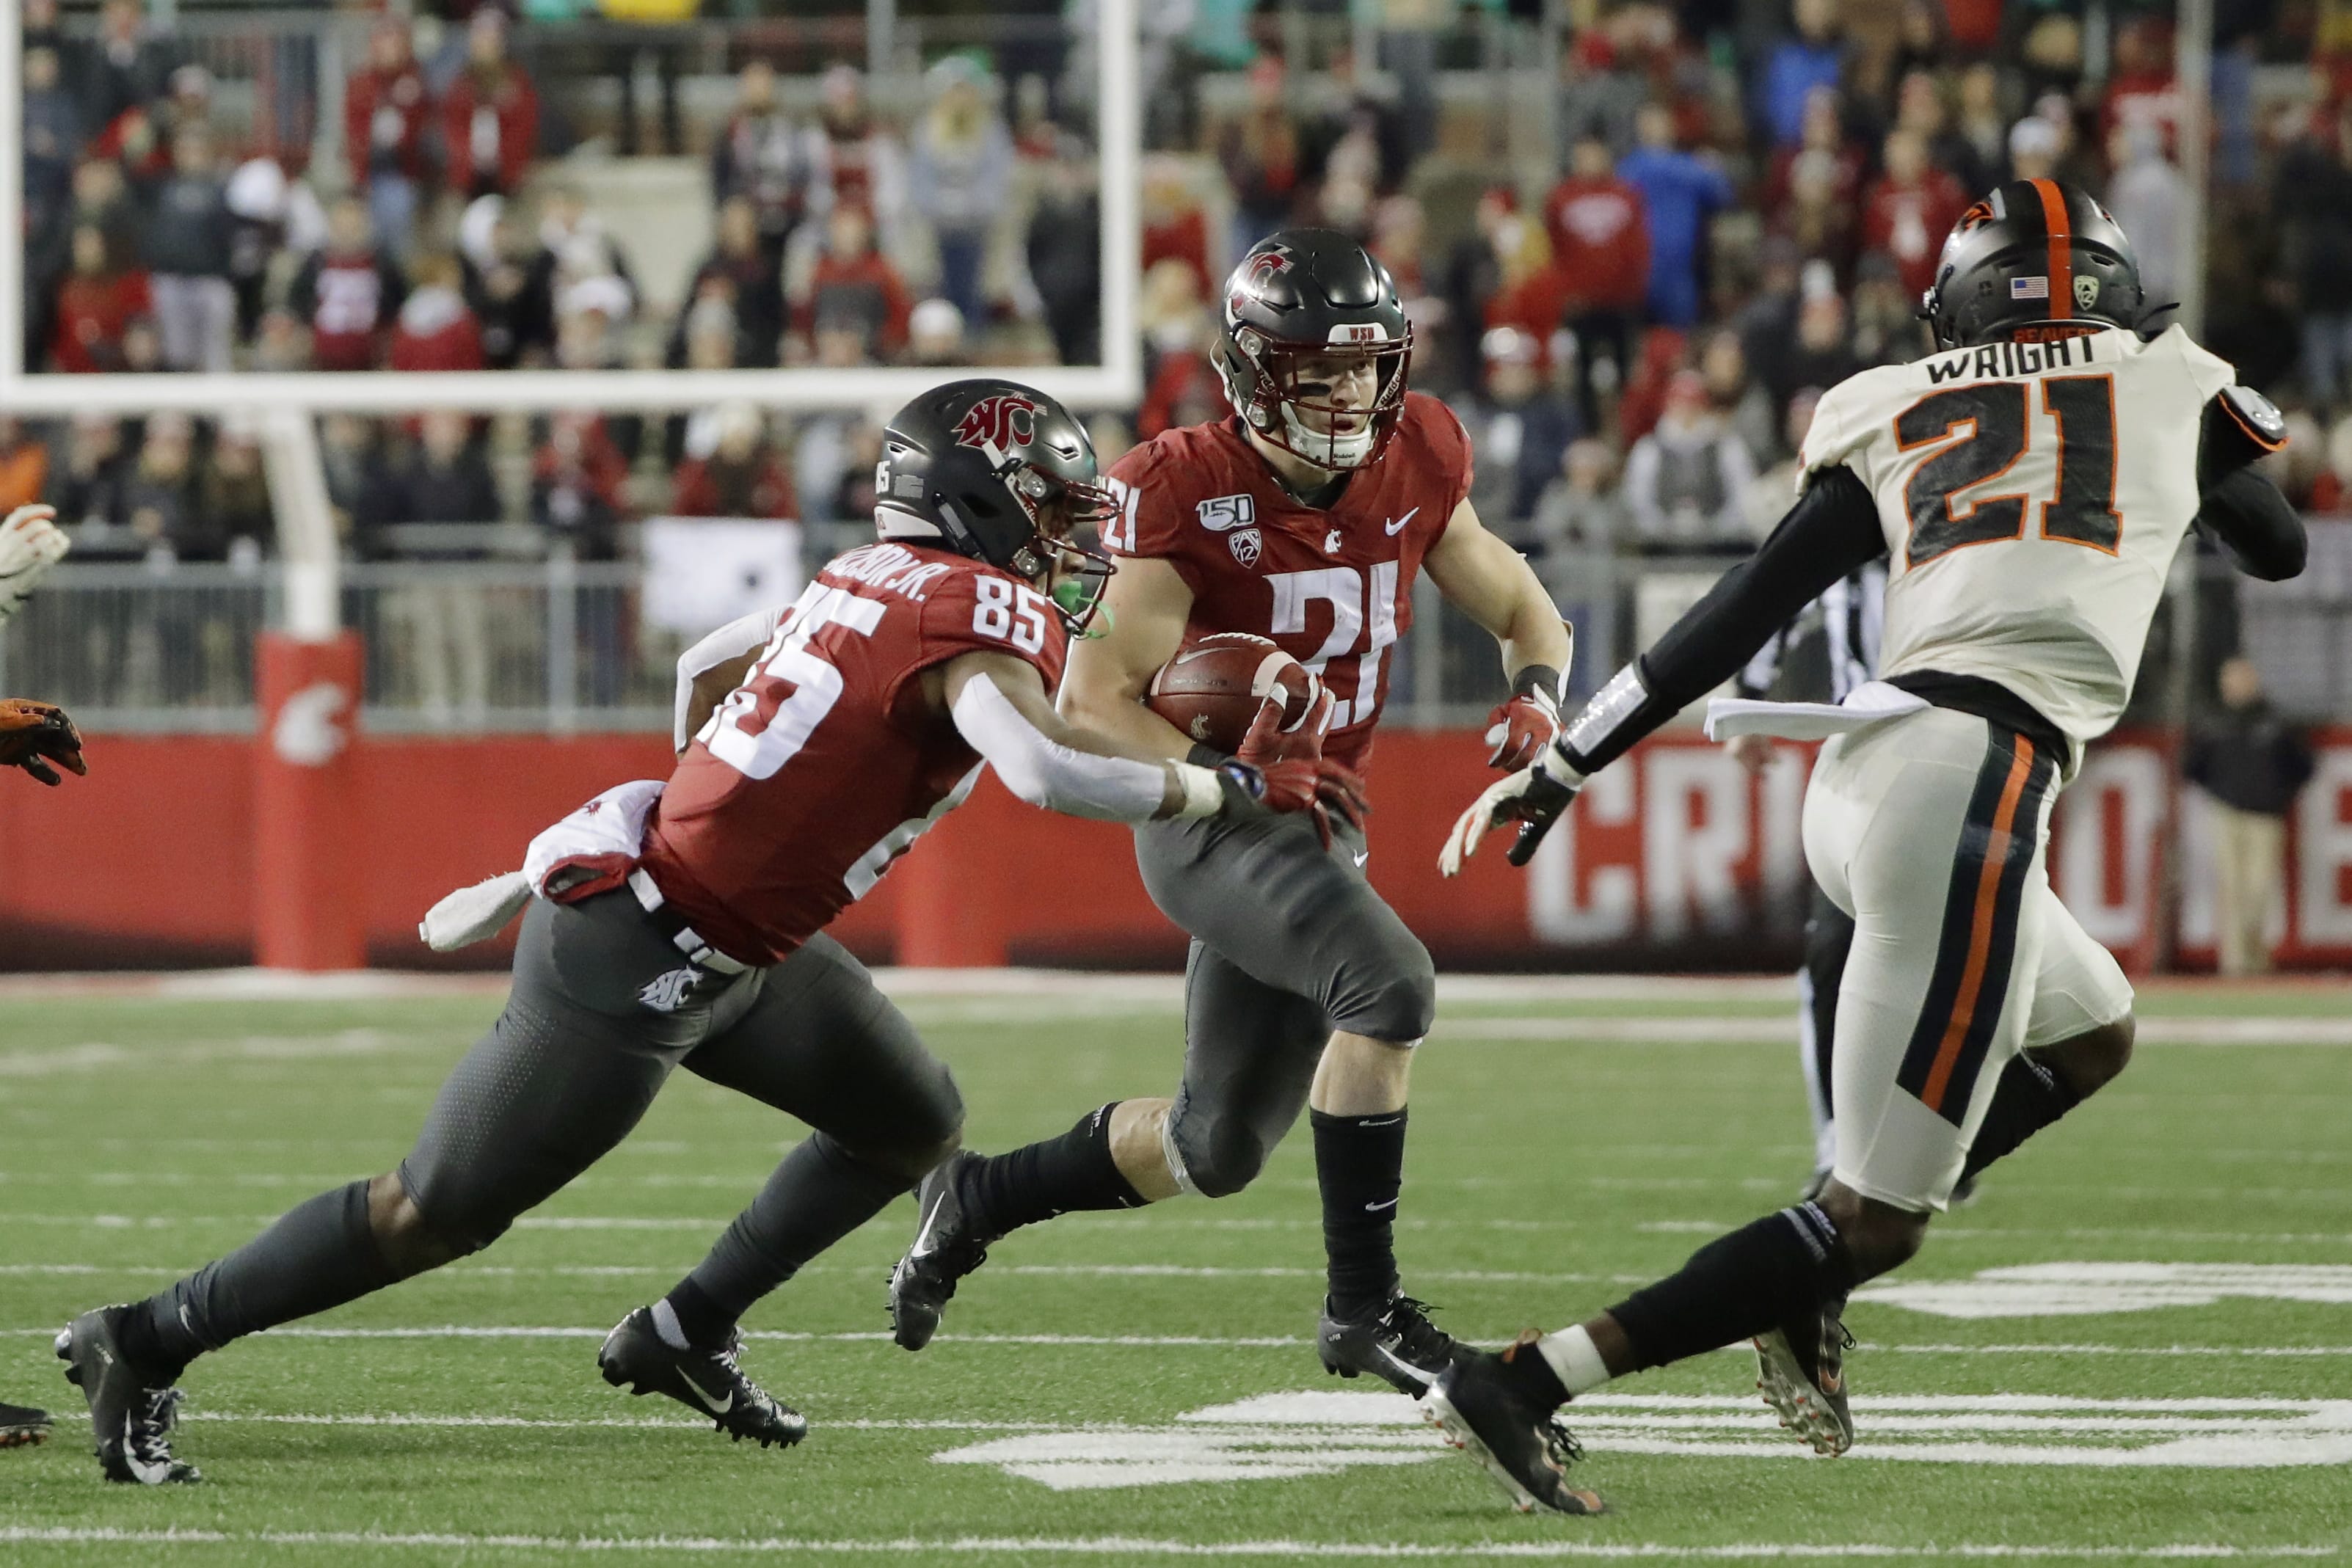 Washington State running back Max Borghi, center, rushes against Oregon State during the second half of an NCAA college football game, Saturday, Nov. 23, 2019, in Pullman, Wash. Washington State won 54-53. (AP Photo/Ted S.